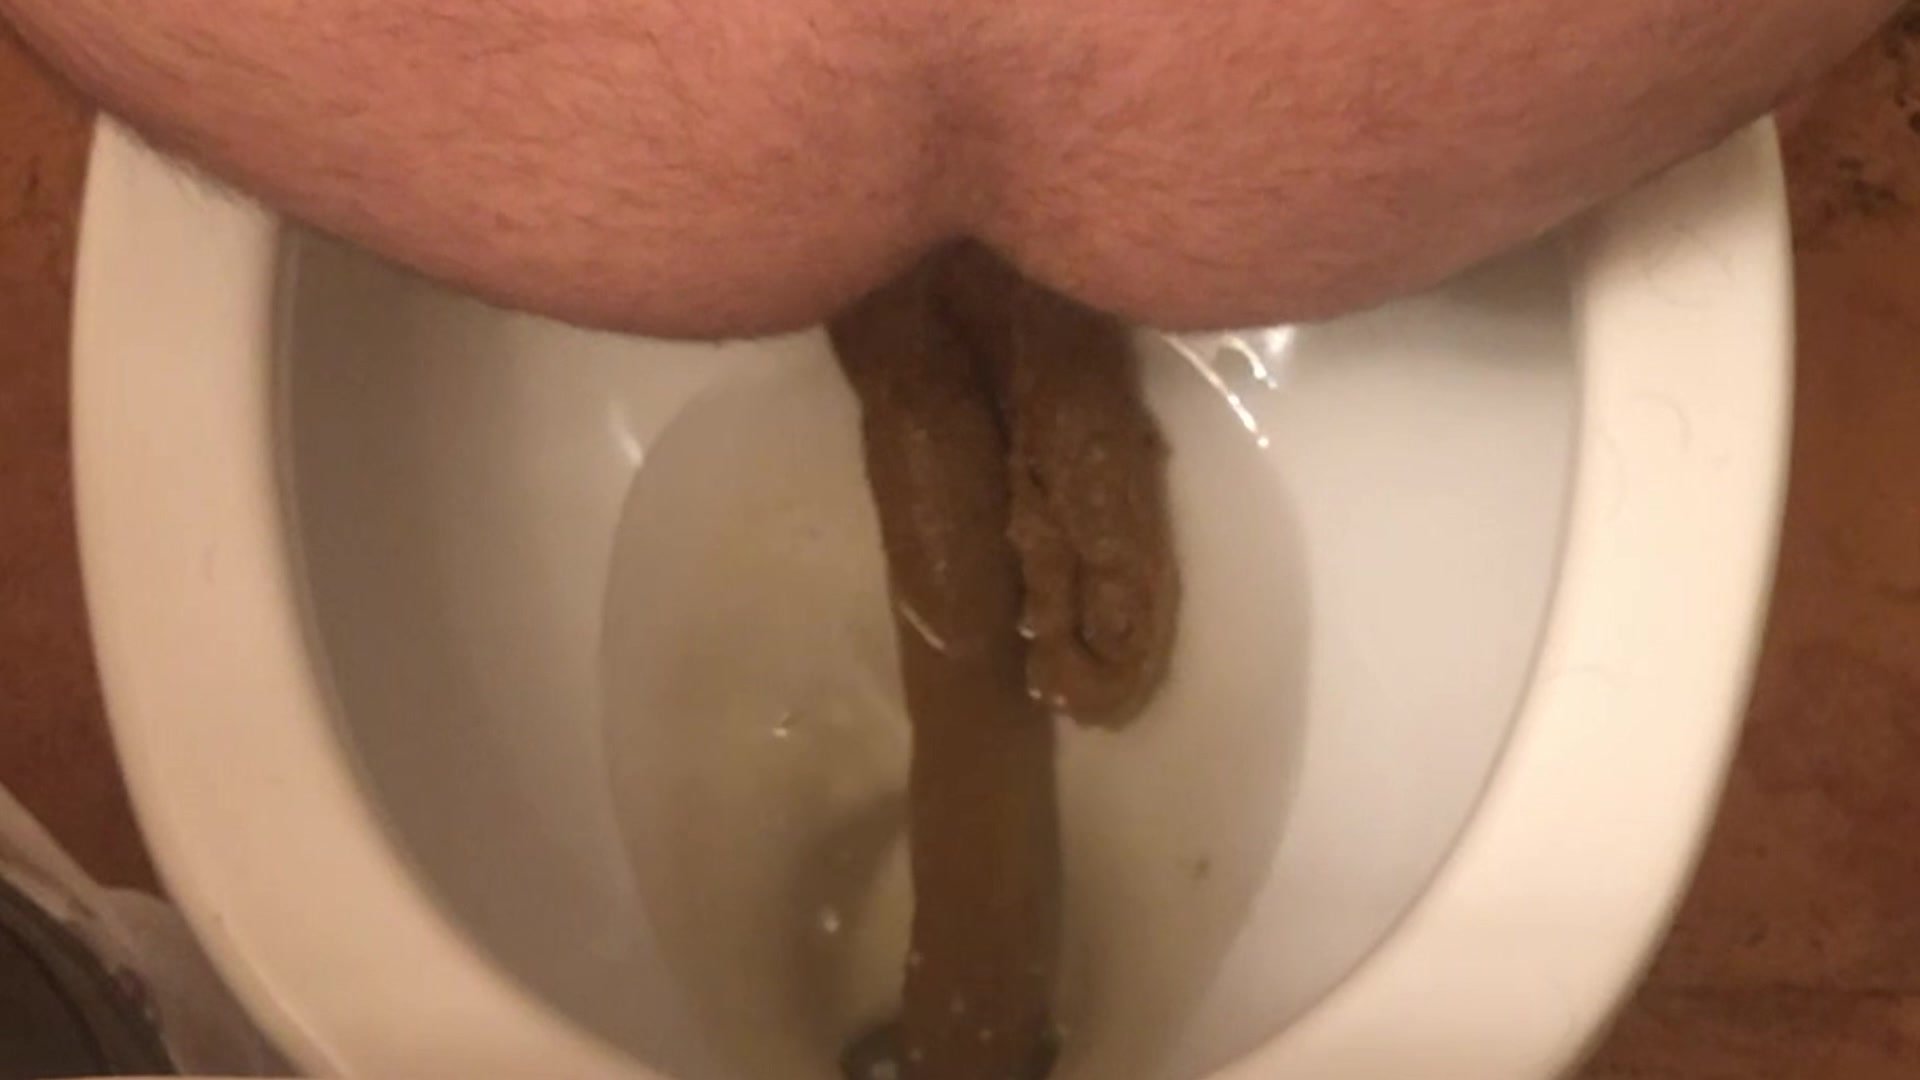 Pooping another big soft turd